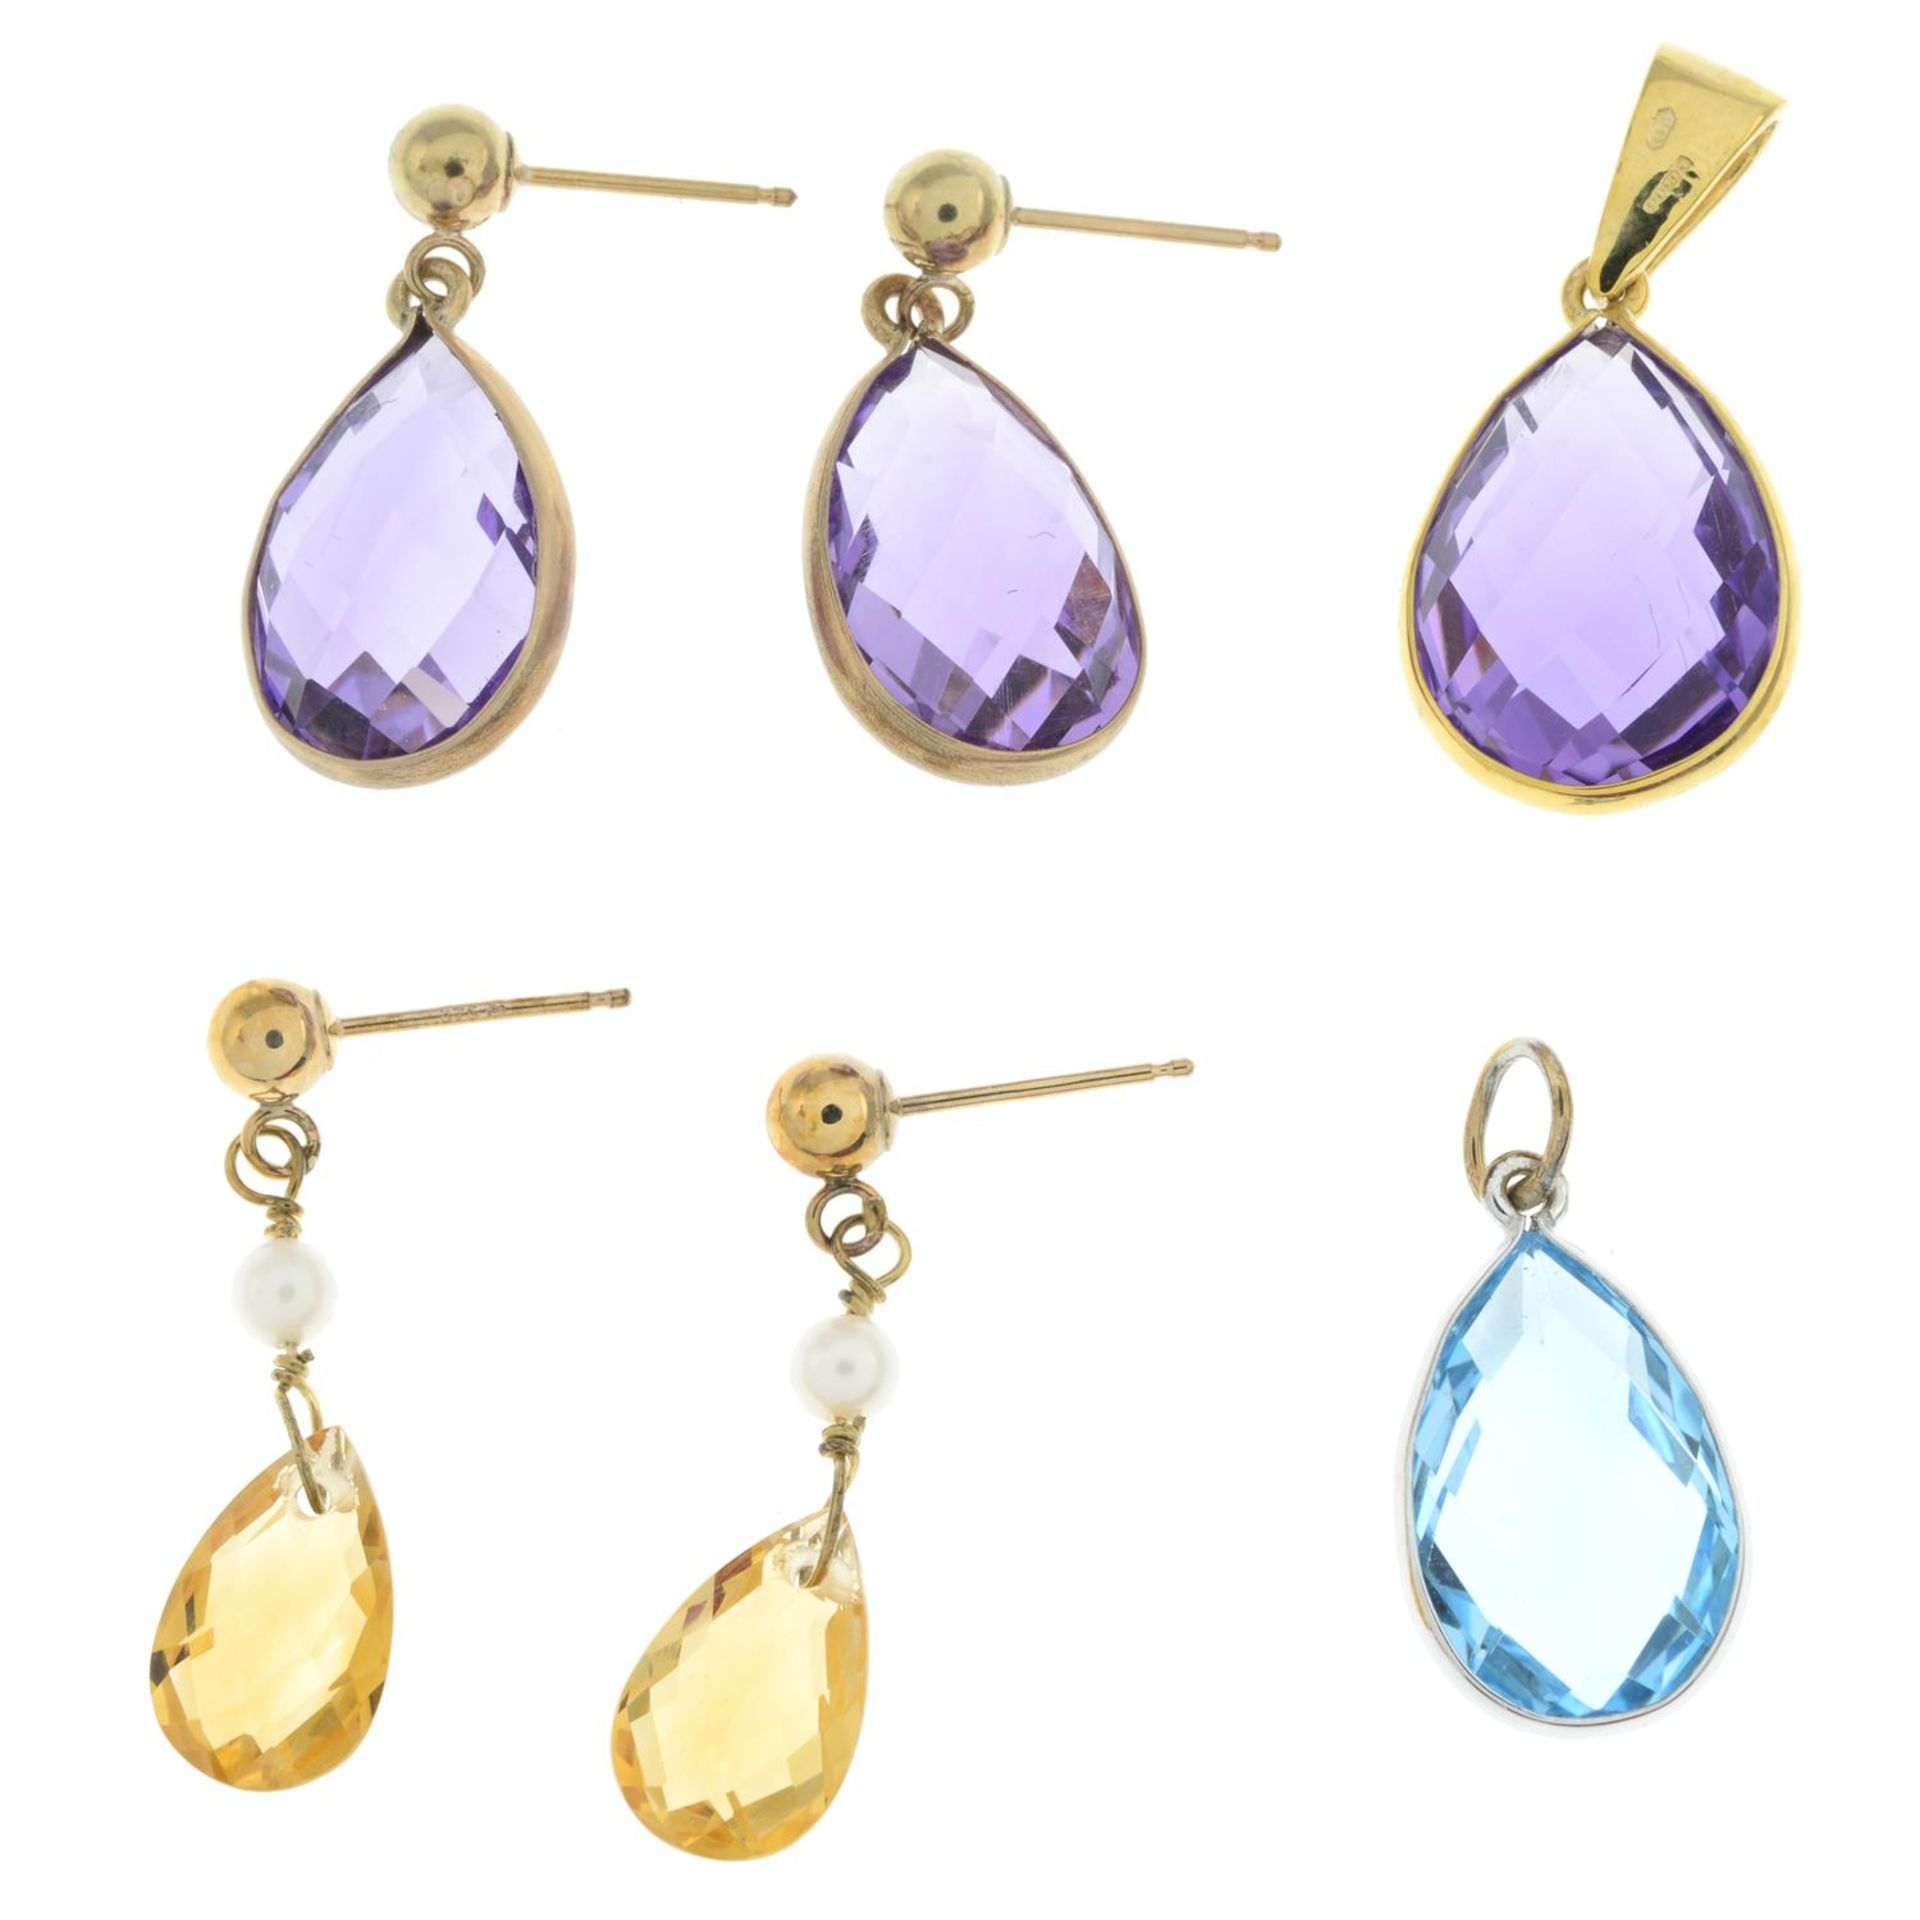 Two pairs of gem earrings & two pendant - Image 2 of 2